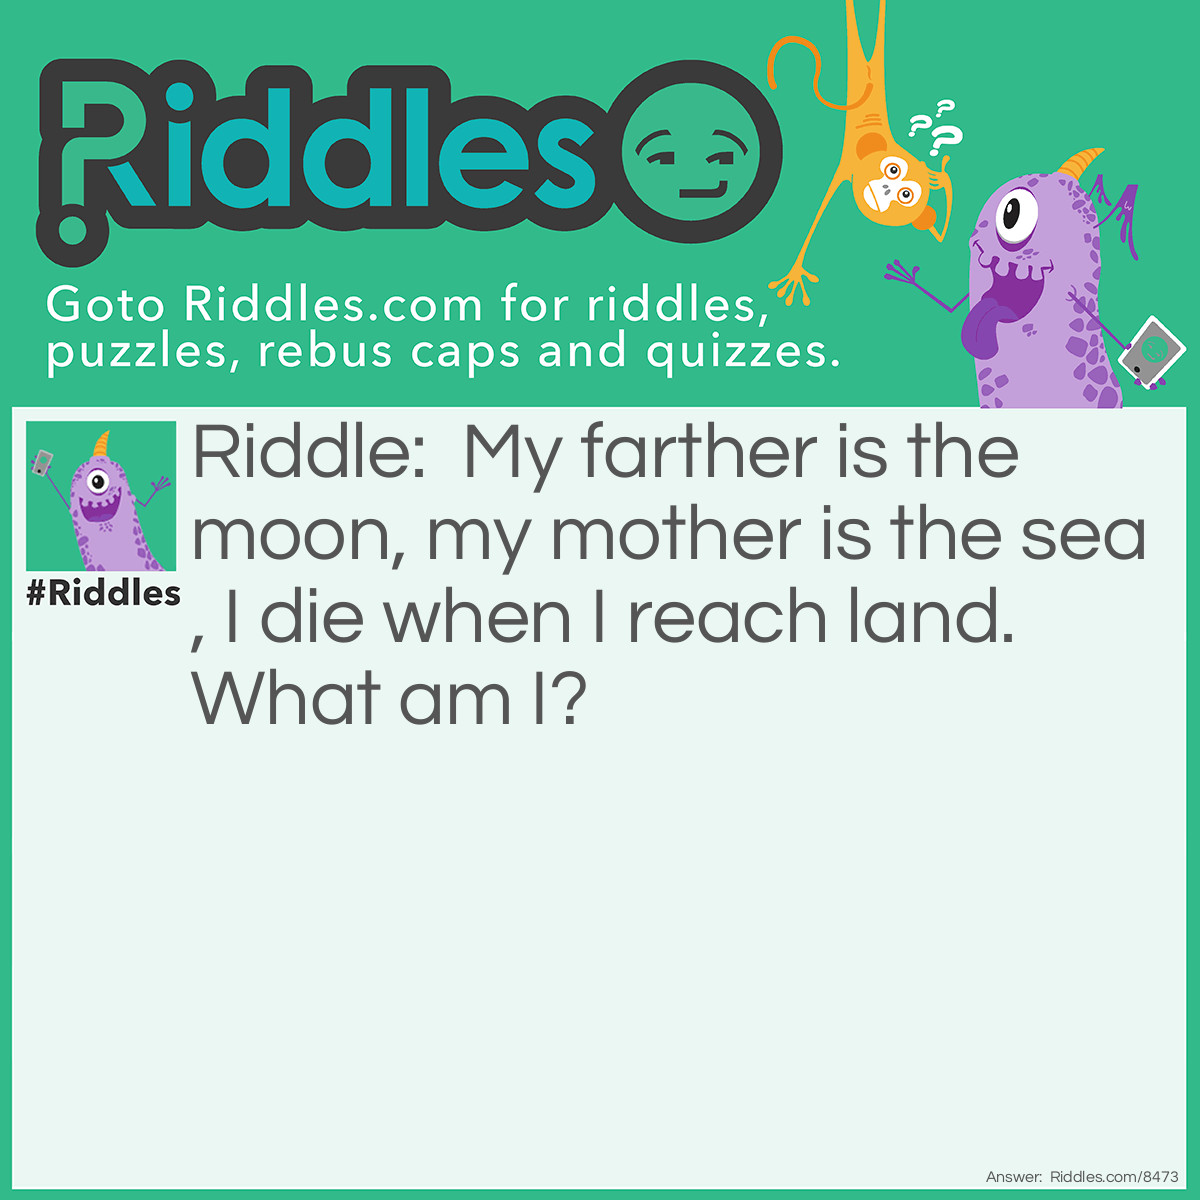 Riddle: My farther is the moon, my mother is the sea, I die when I reach land. What am I? Answer: Waves.